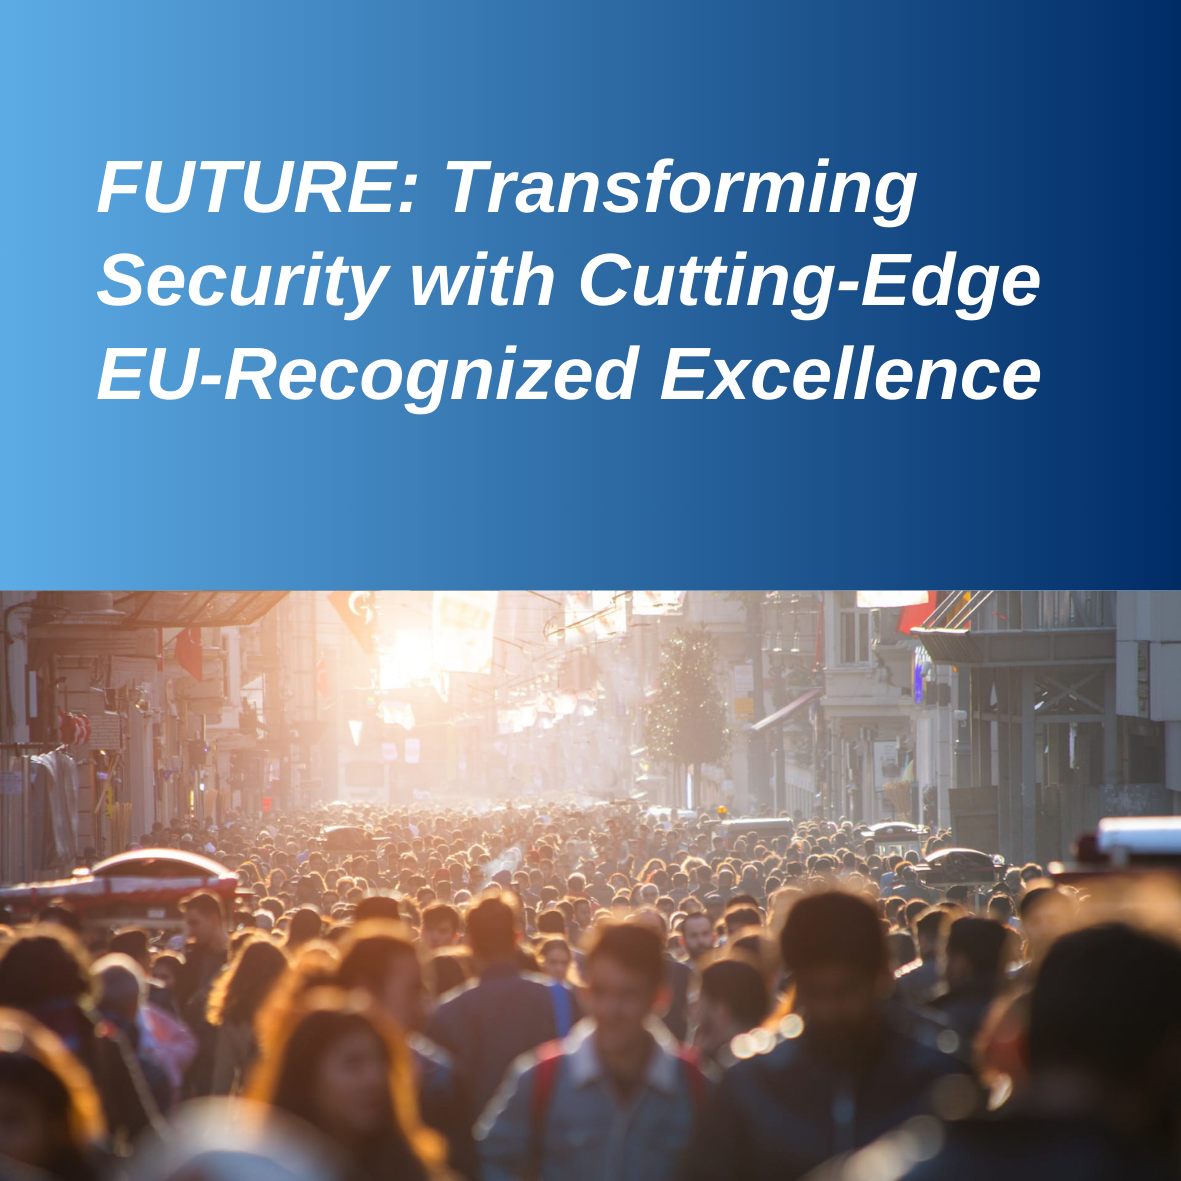 FUTURE: Transforming Security with Cutting-Edge EU-Recognized Excellence